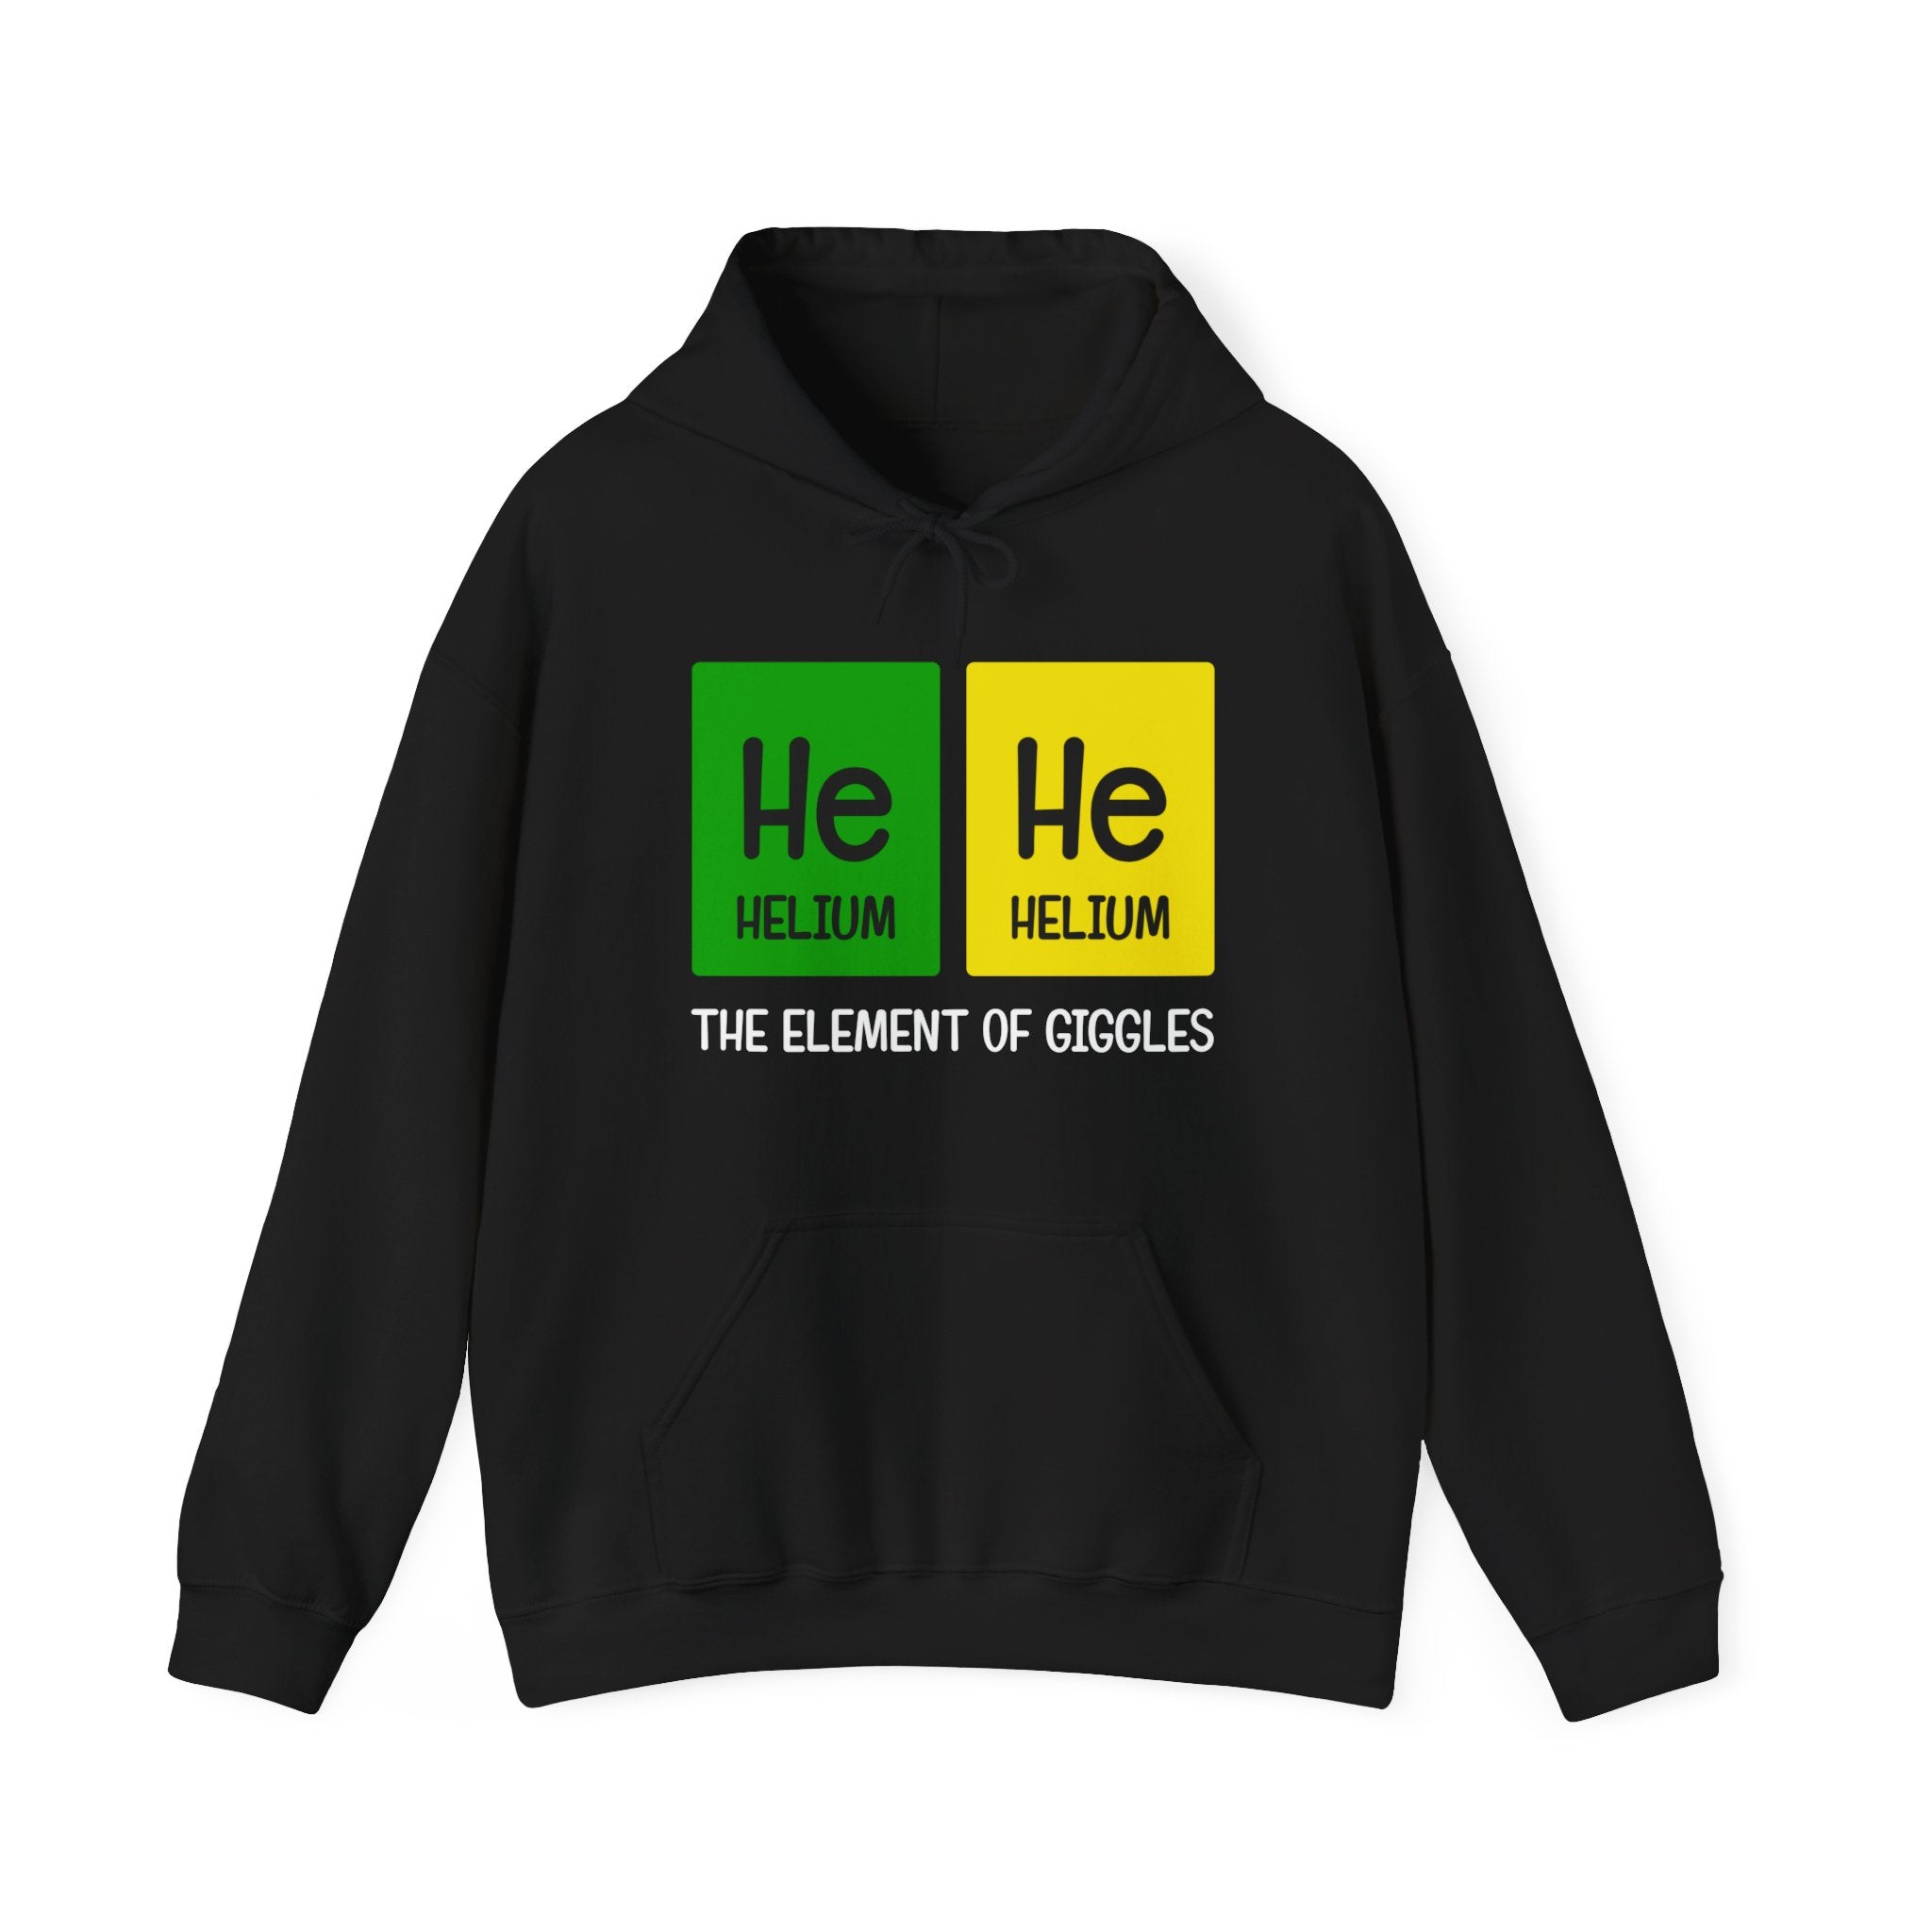 He-He - Hooded Sweatshirt featuring a design with two periodic table boxes labeled "He", symbolizing helium, with the humorous caption "THE ELEMENT OF GIGGLES." This He-He design offers ultimate comfort and a playful twist on science.